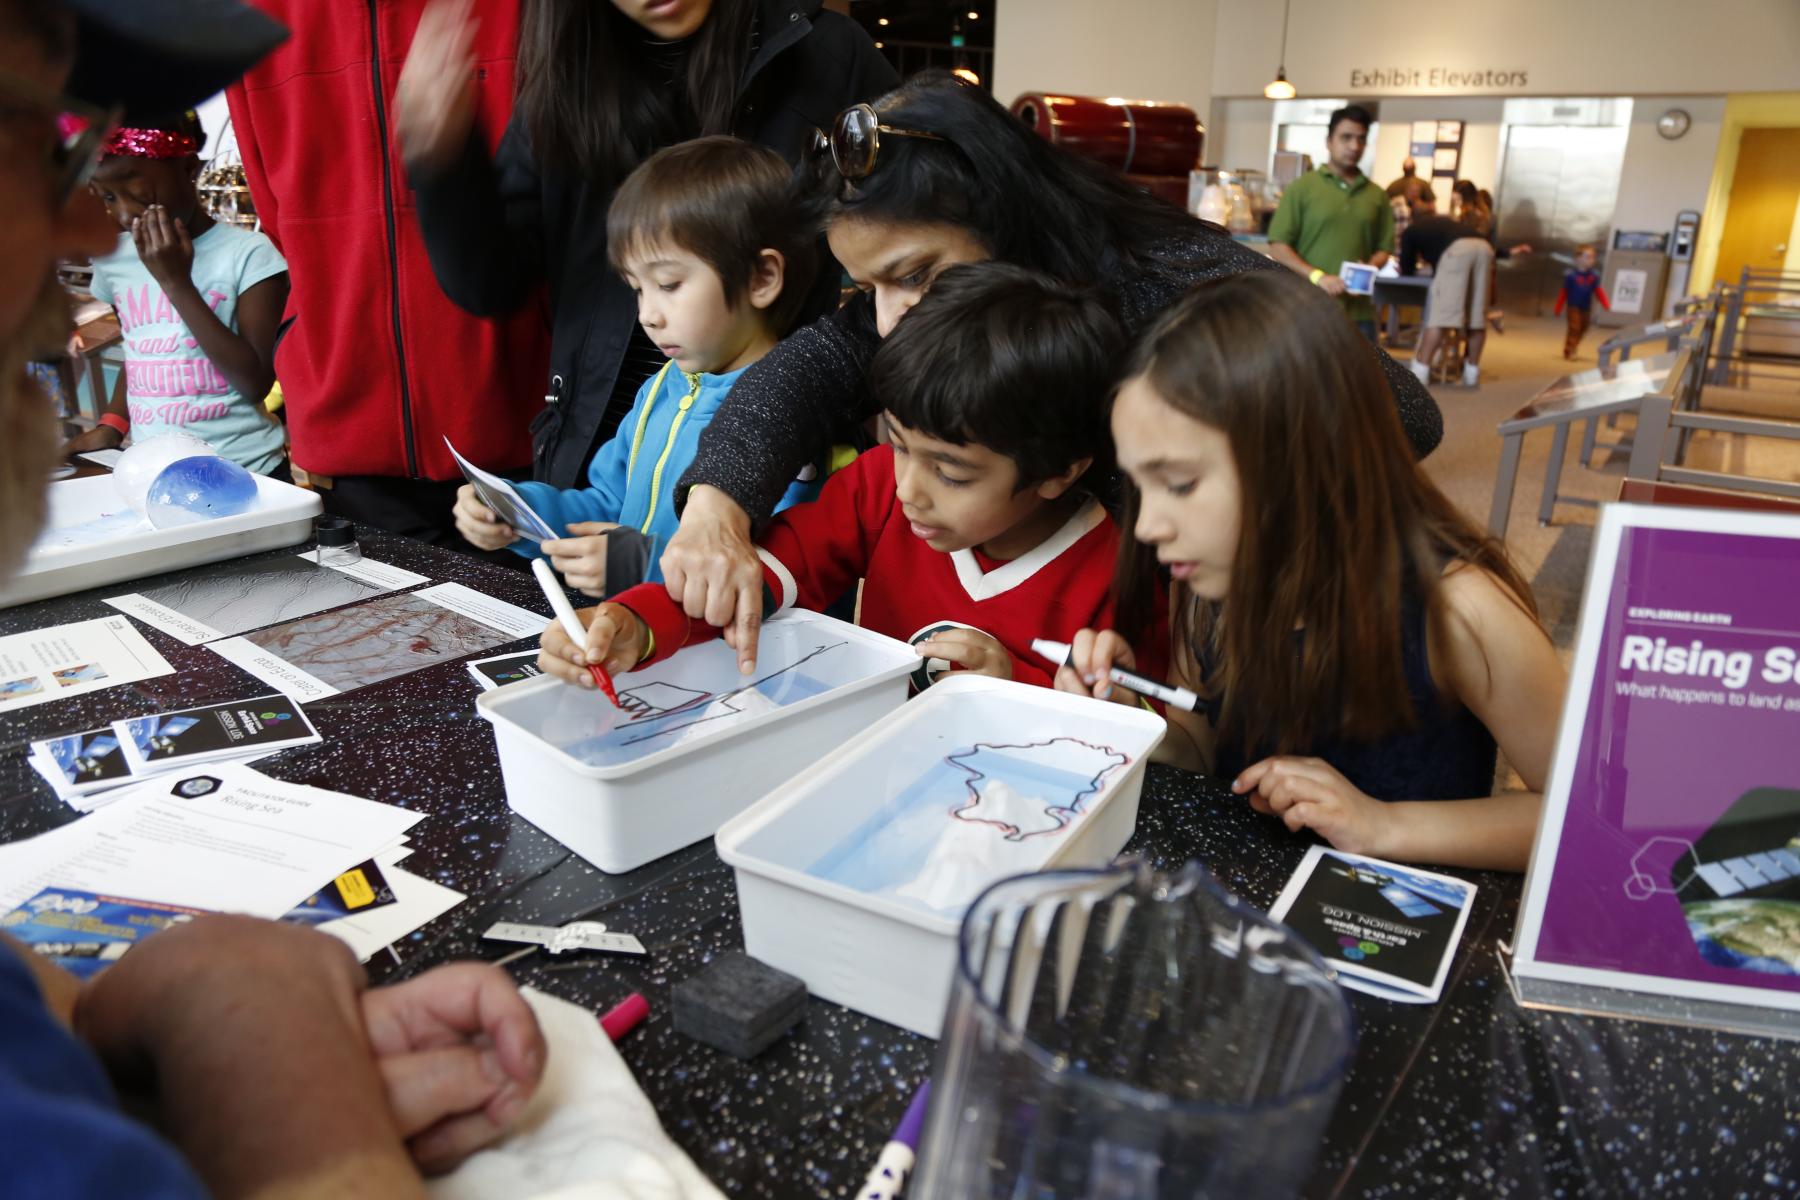 Children using Rising Seas activtiy at Science Museum of Minnesota event participating by drawing and looking at activity